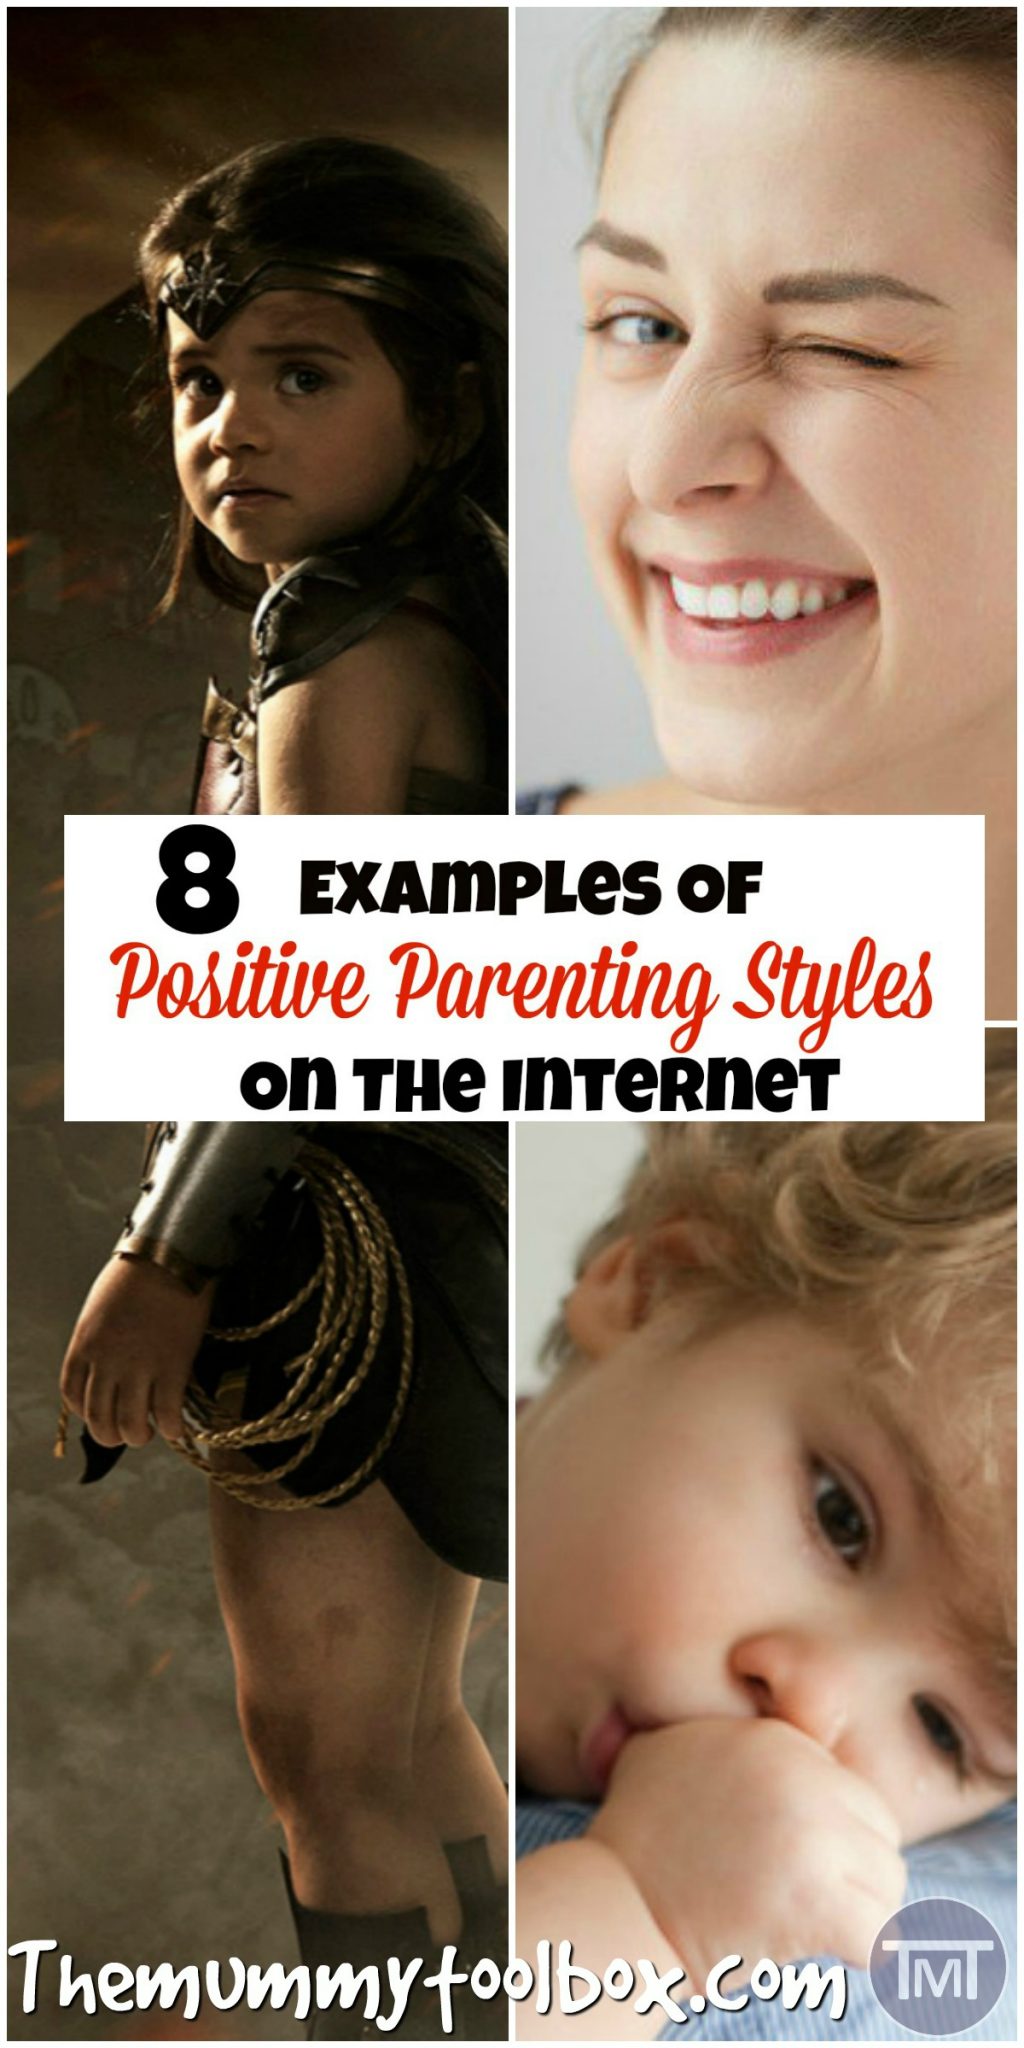 parenting is hard but here are some examples of positive parenting styles to combat the keyboard warriors and negativity that is raging at the moment. 